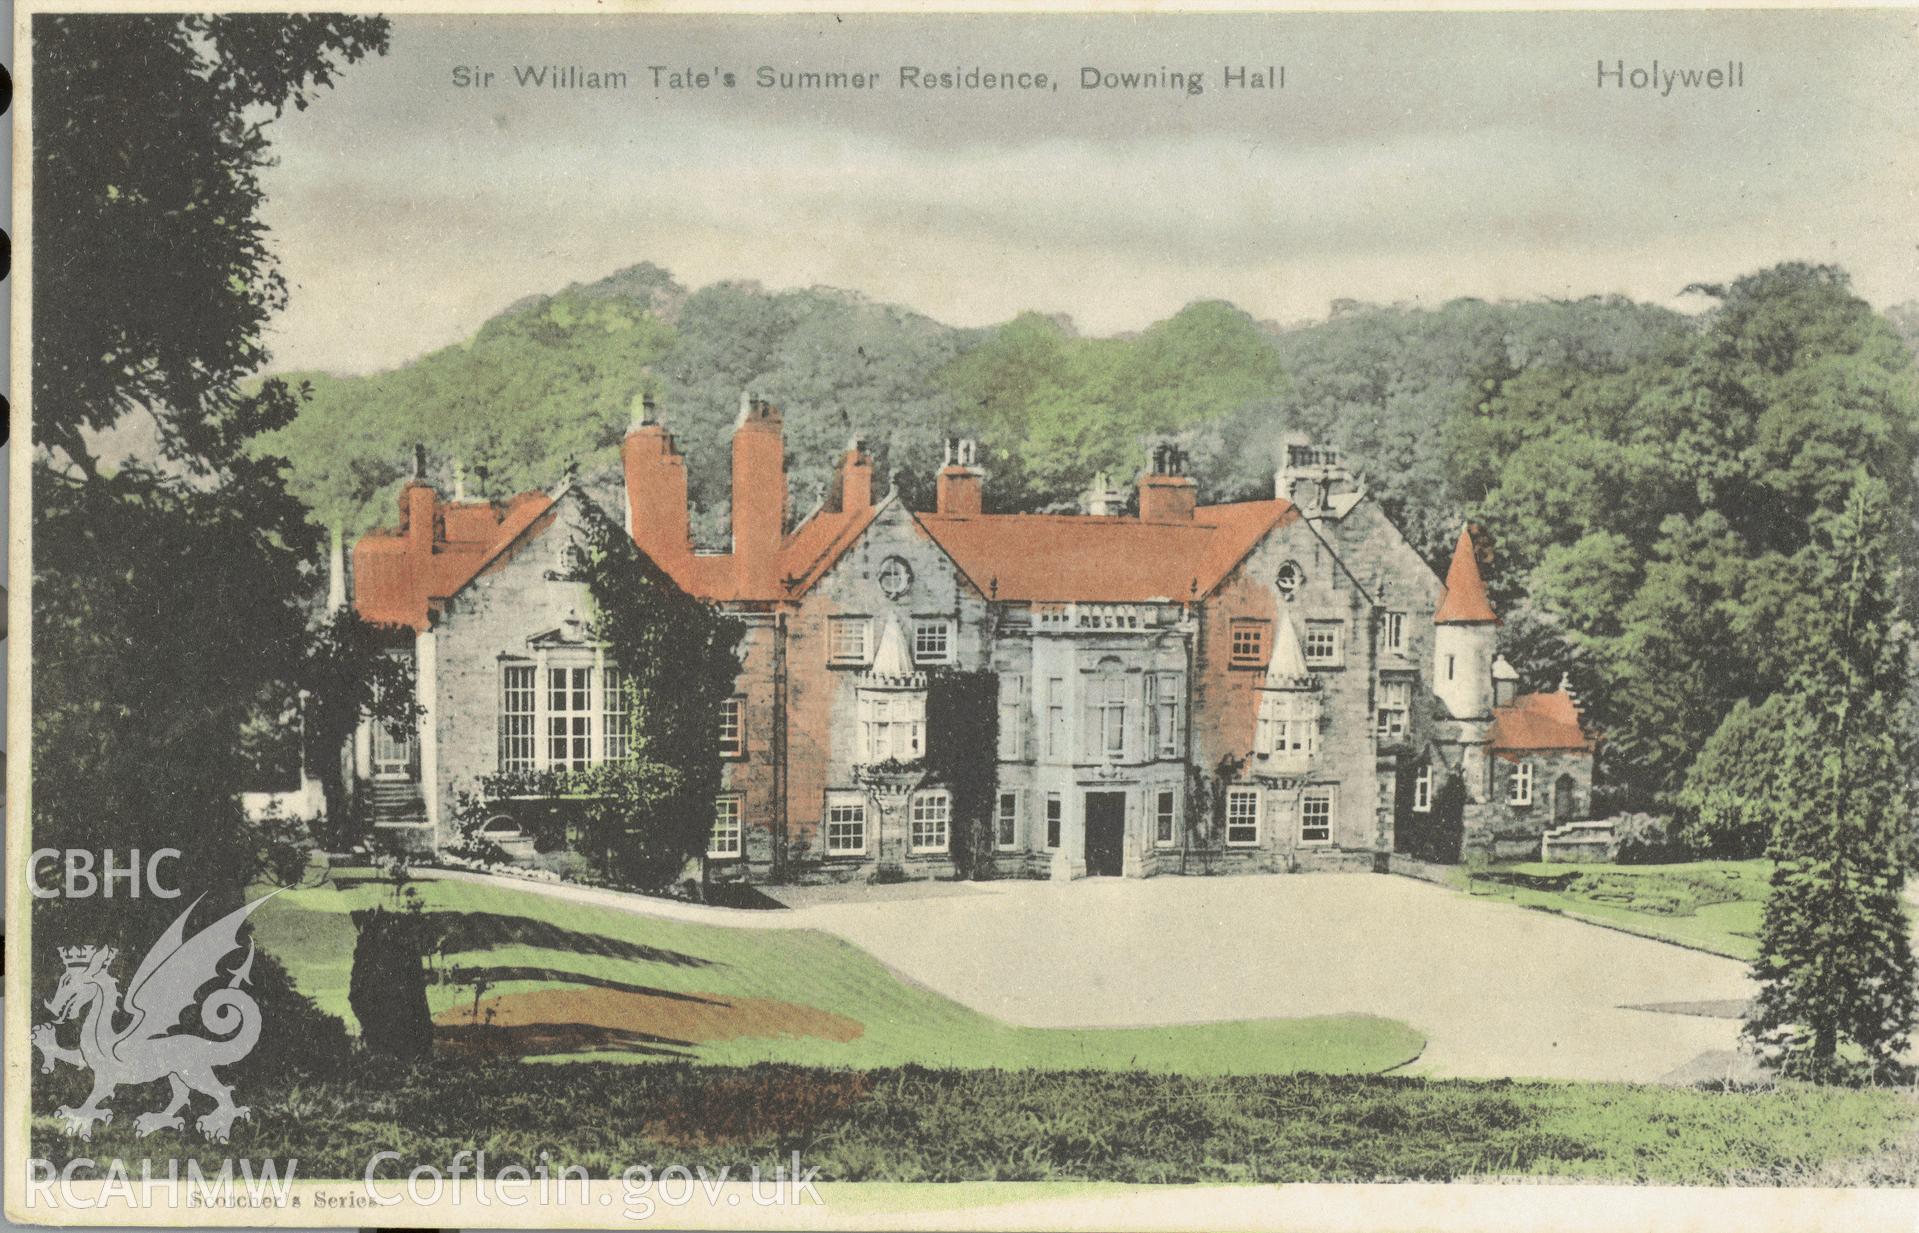 Digitised postcard image of Downing Hall, Scotcher's Series Published by Stewart and Woolf, London. Produced by Parks and Gardens Data Services, from an original item in the Peter Davis Collection at Parks and Gardens UK. We hold only web-resolution images of this collection, suitable for viewing on screen and for research purposes only. We do not hold the original images, or publication quality scans.